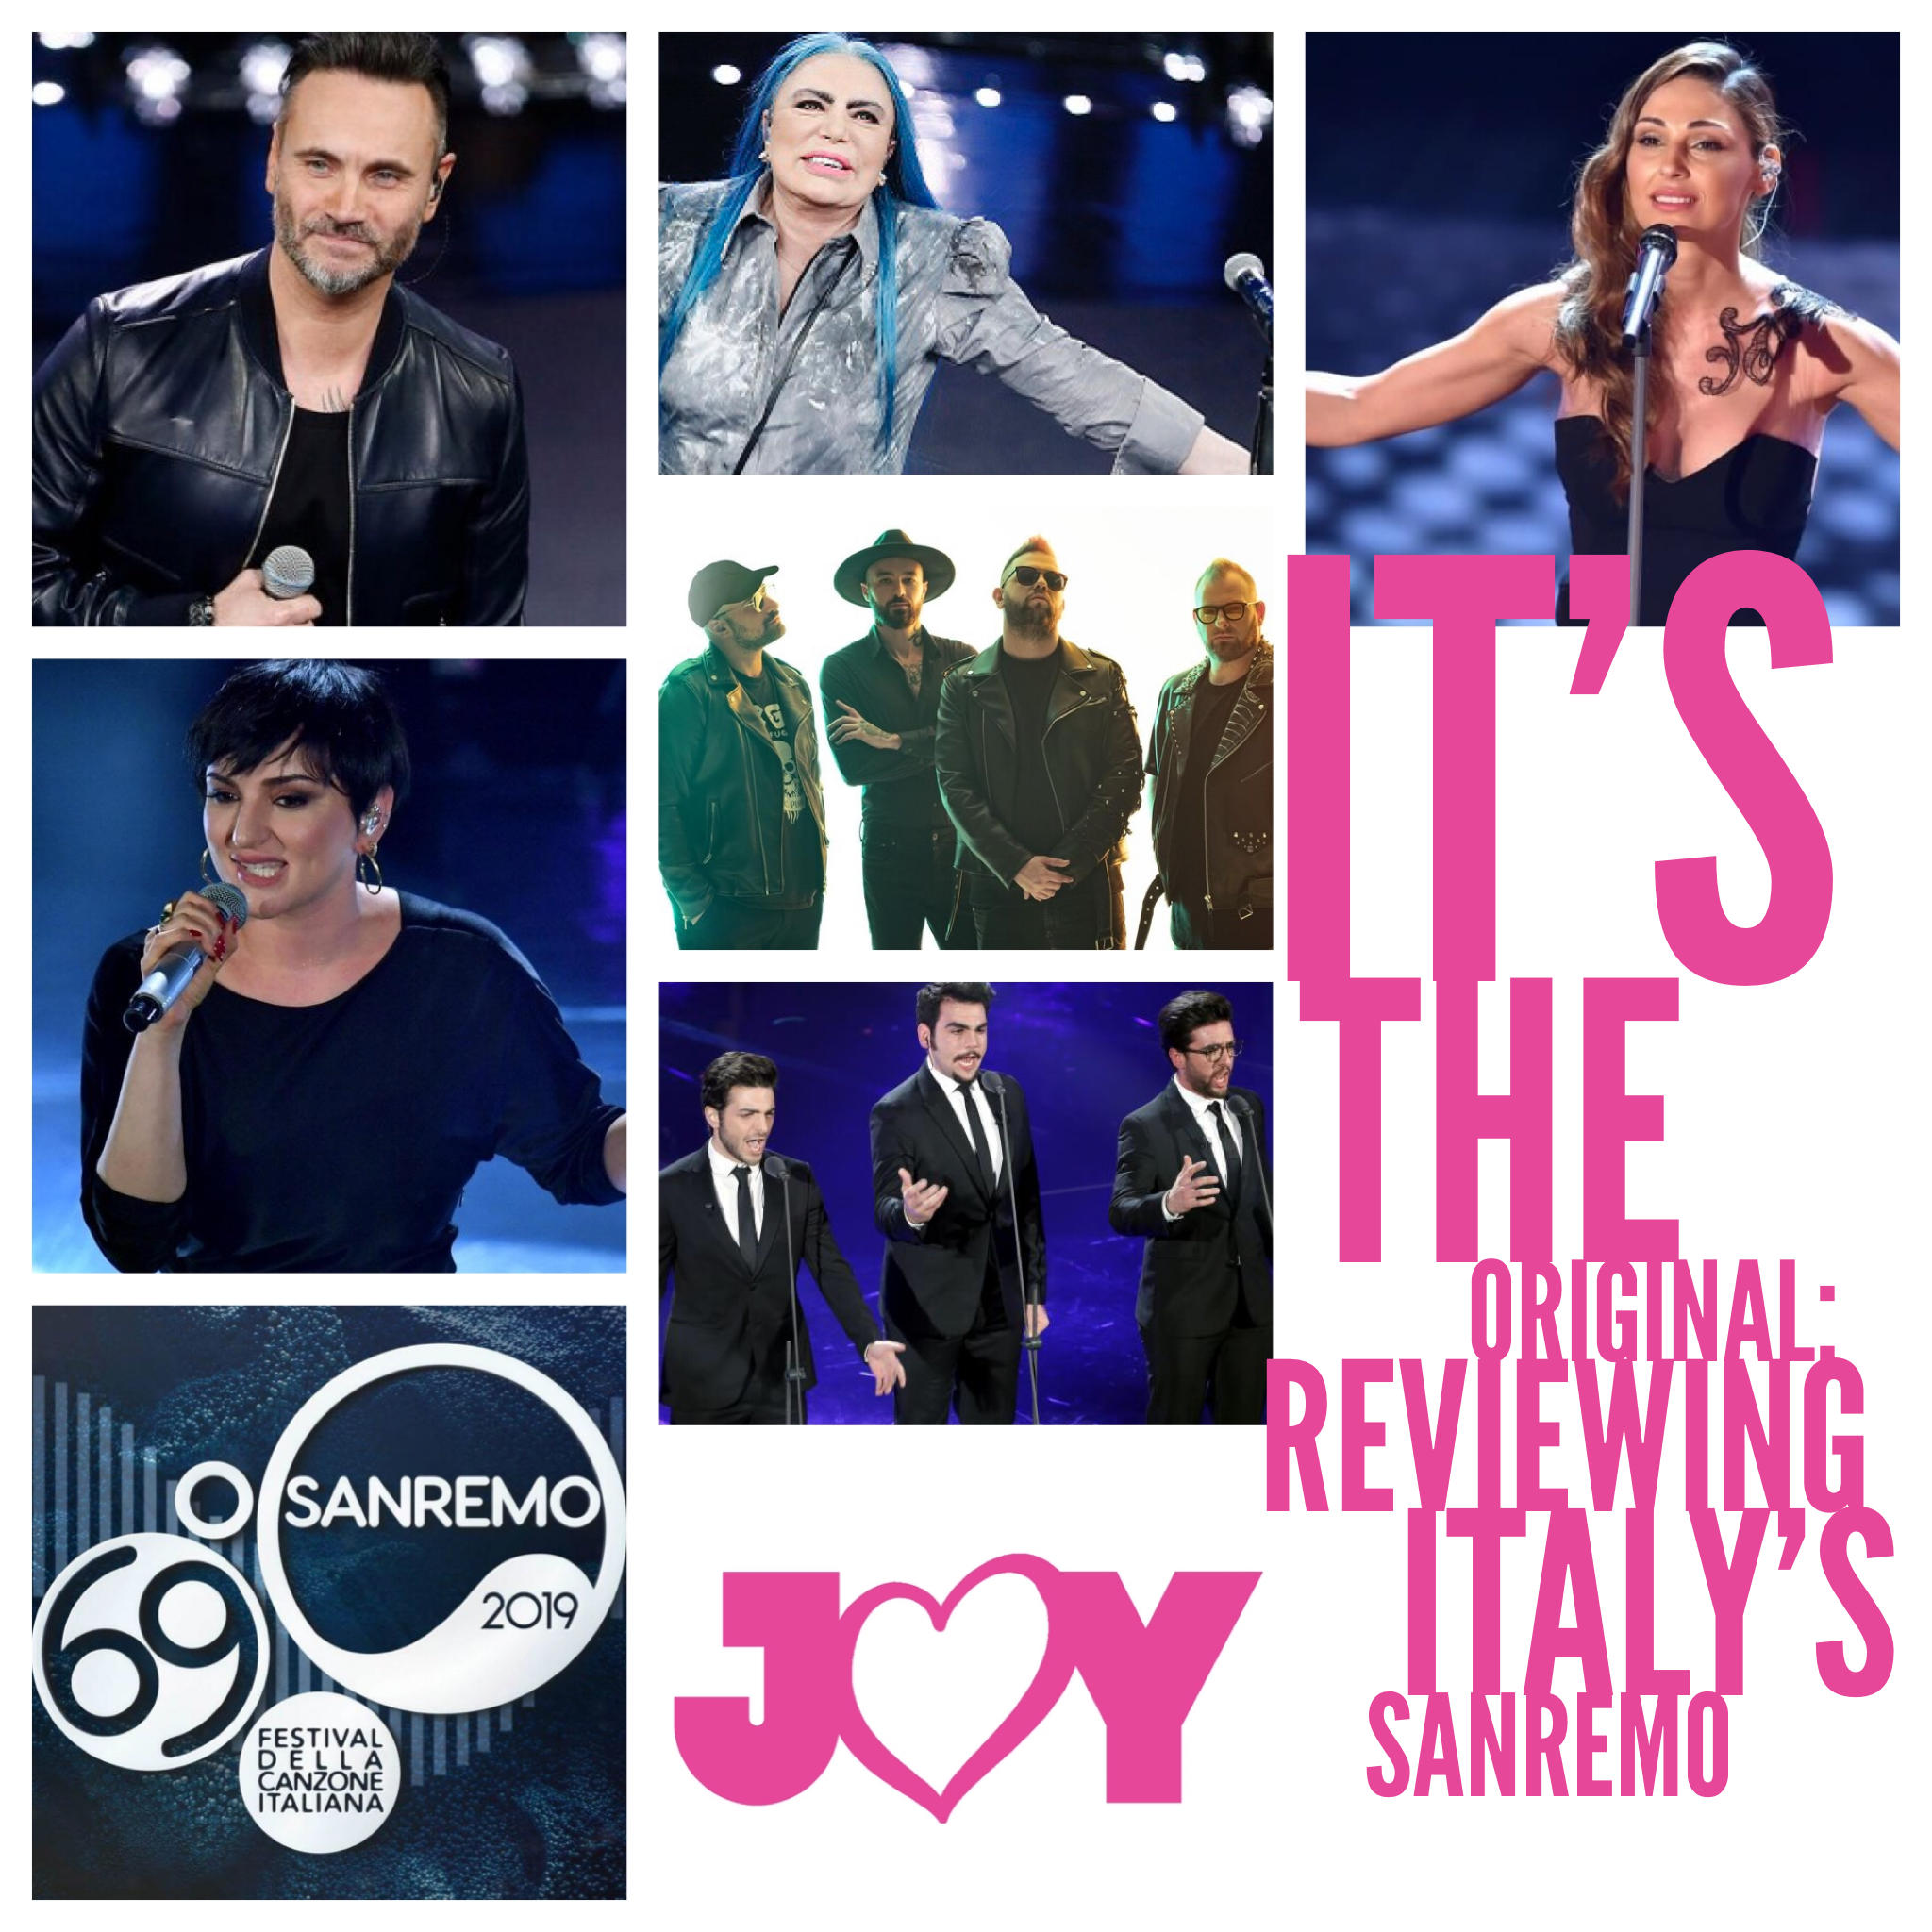 It’s the original: Reviewing Italy’s Sanremo